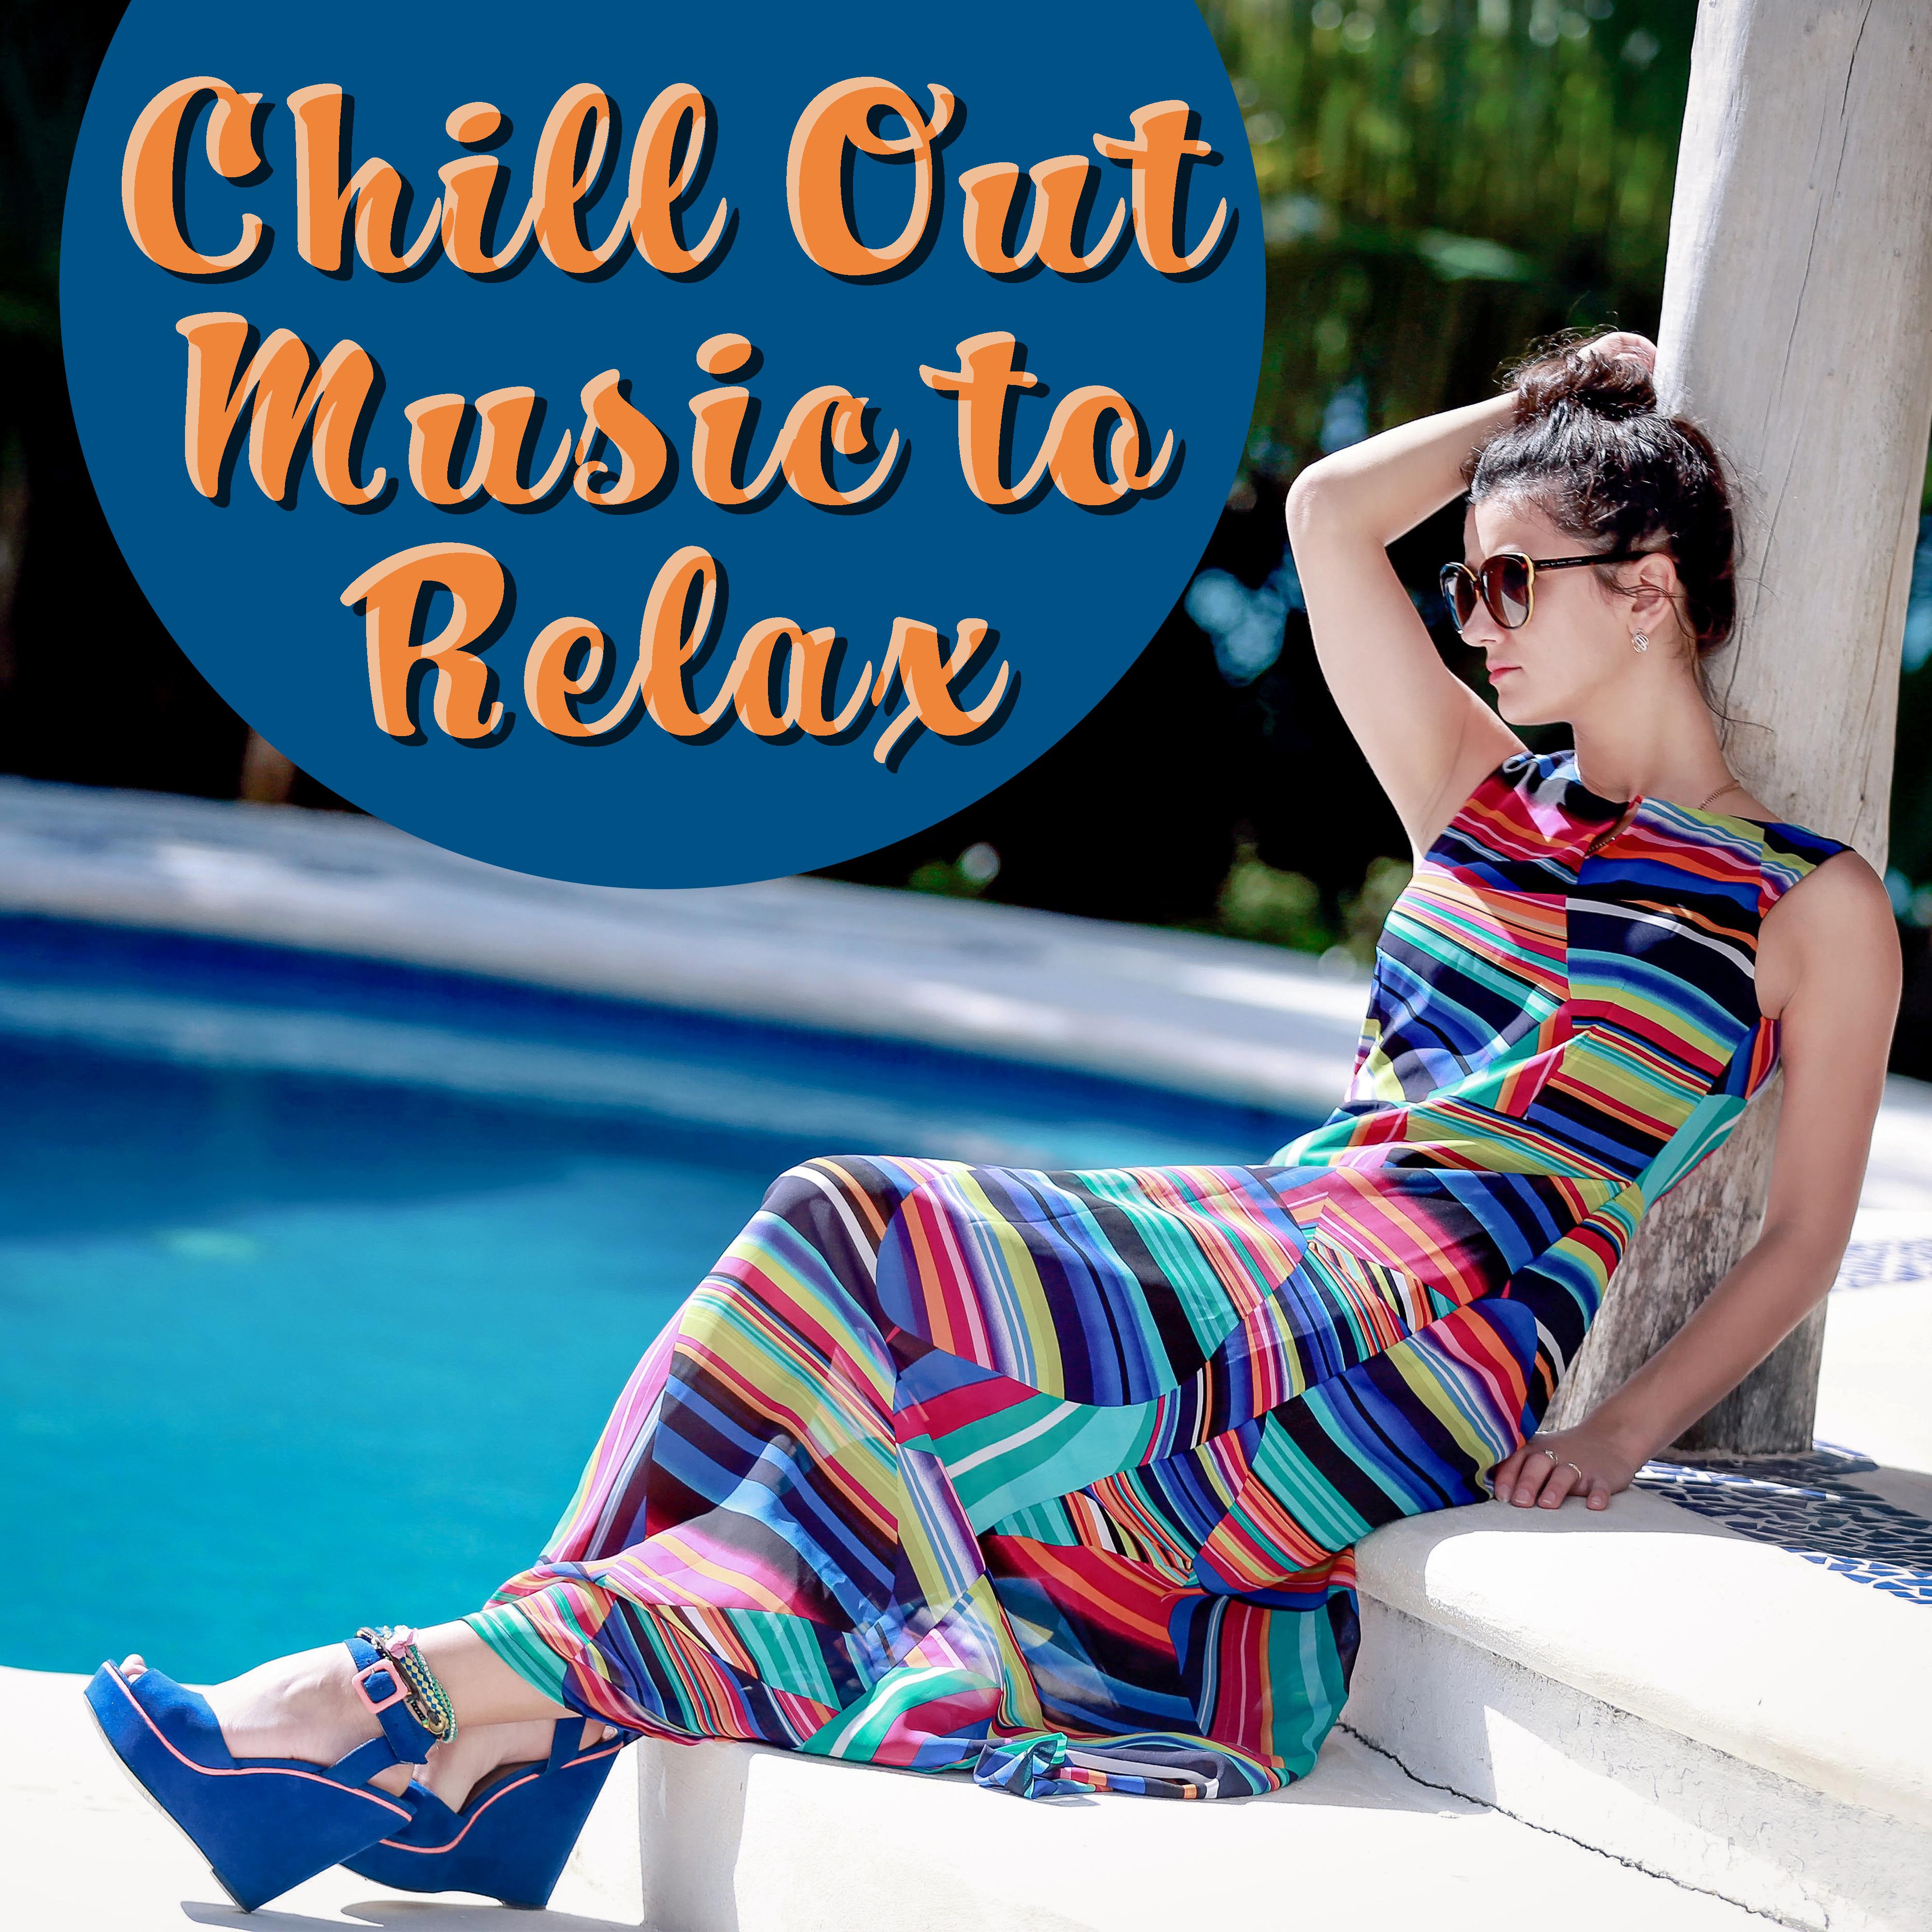 Chill Out Music to Relax  Soft Sounds to Calm Down, Chill Out Relaxation, Mind Calmness, No More Stress